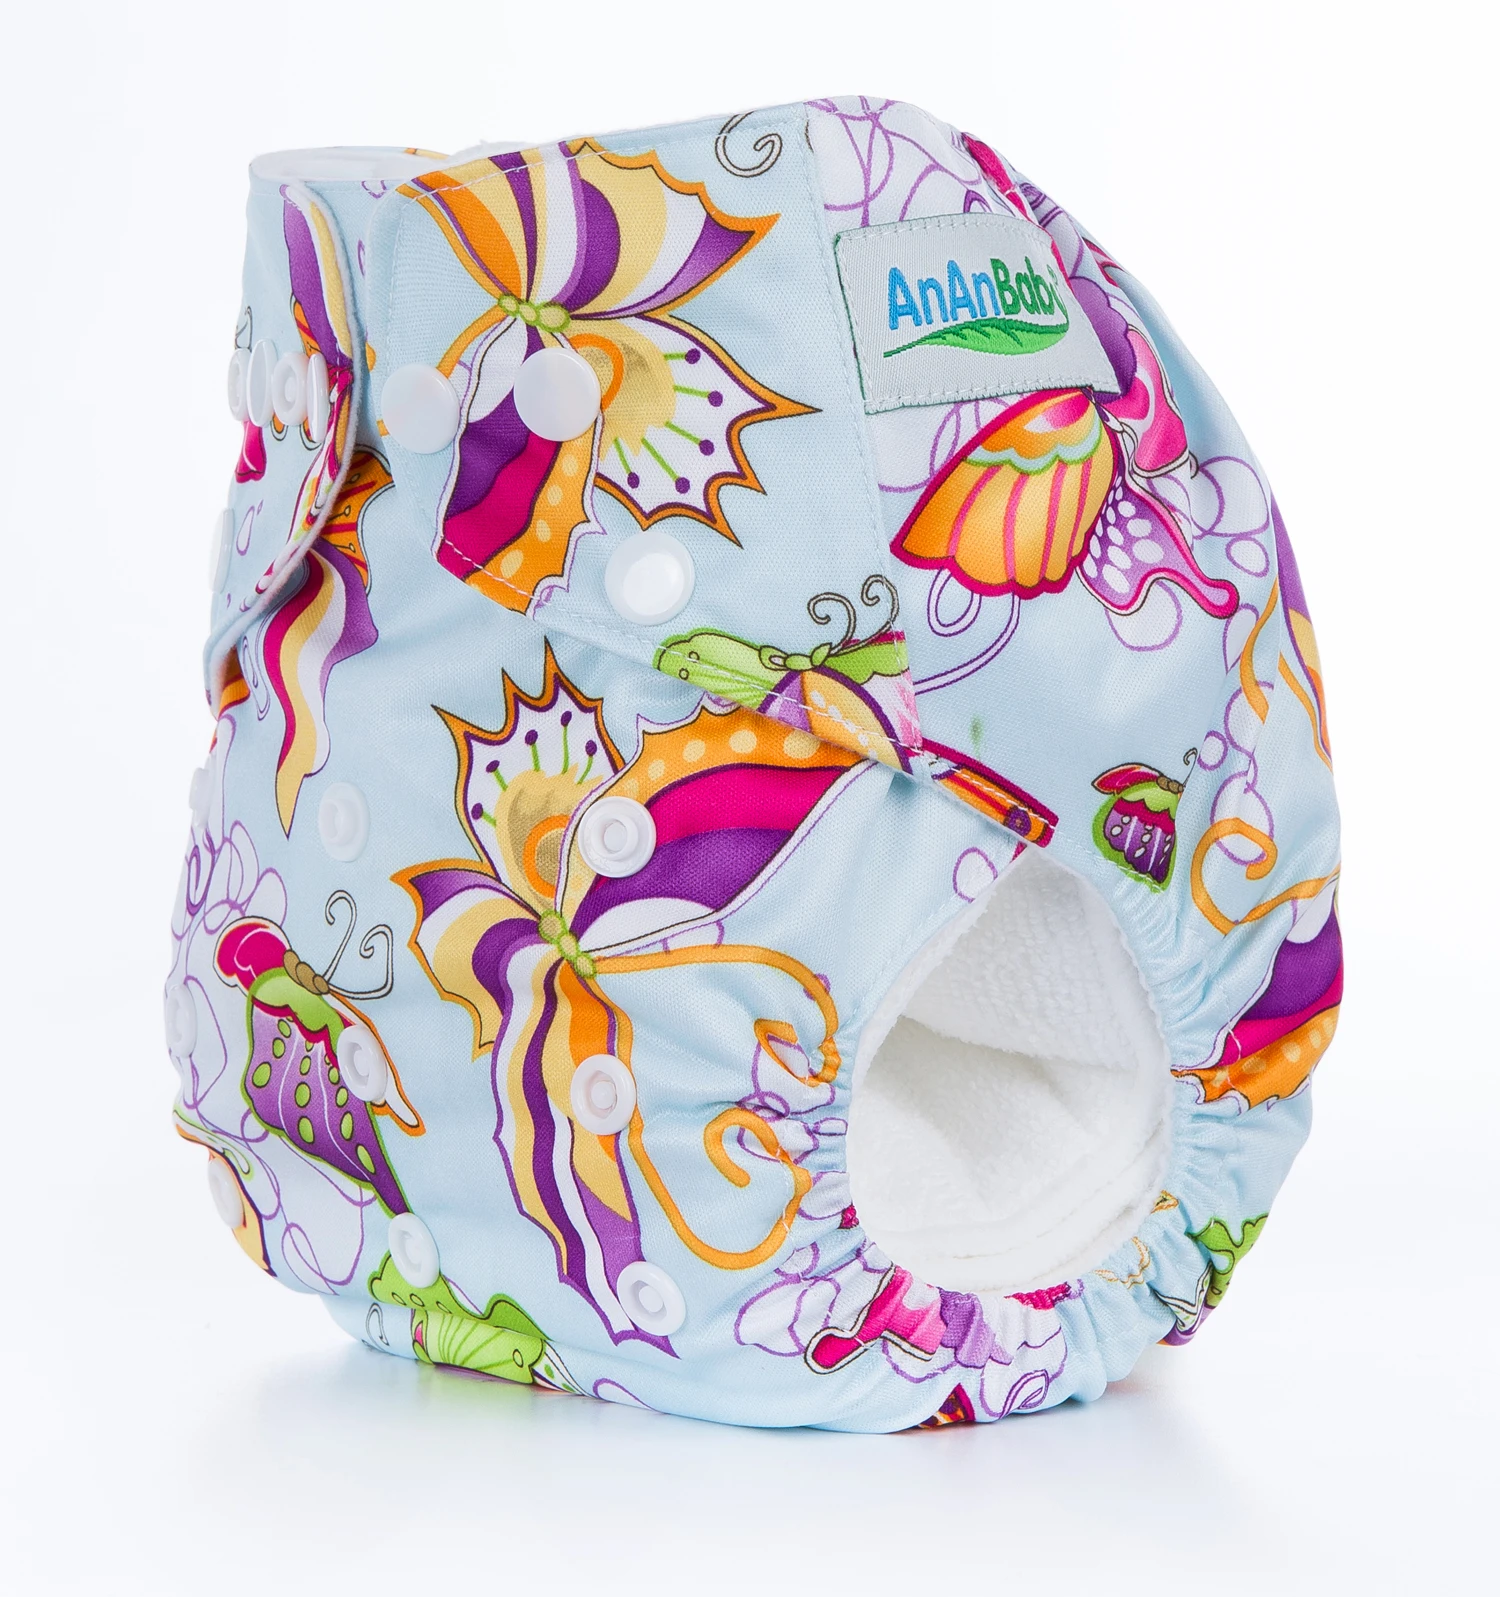 

Ananbaby Washable Baby Reusable Diapers Bamboo Charcoal Cloth Diaper Manufacturer, Colorful